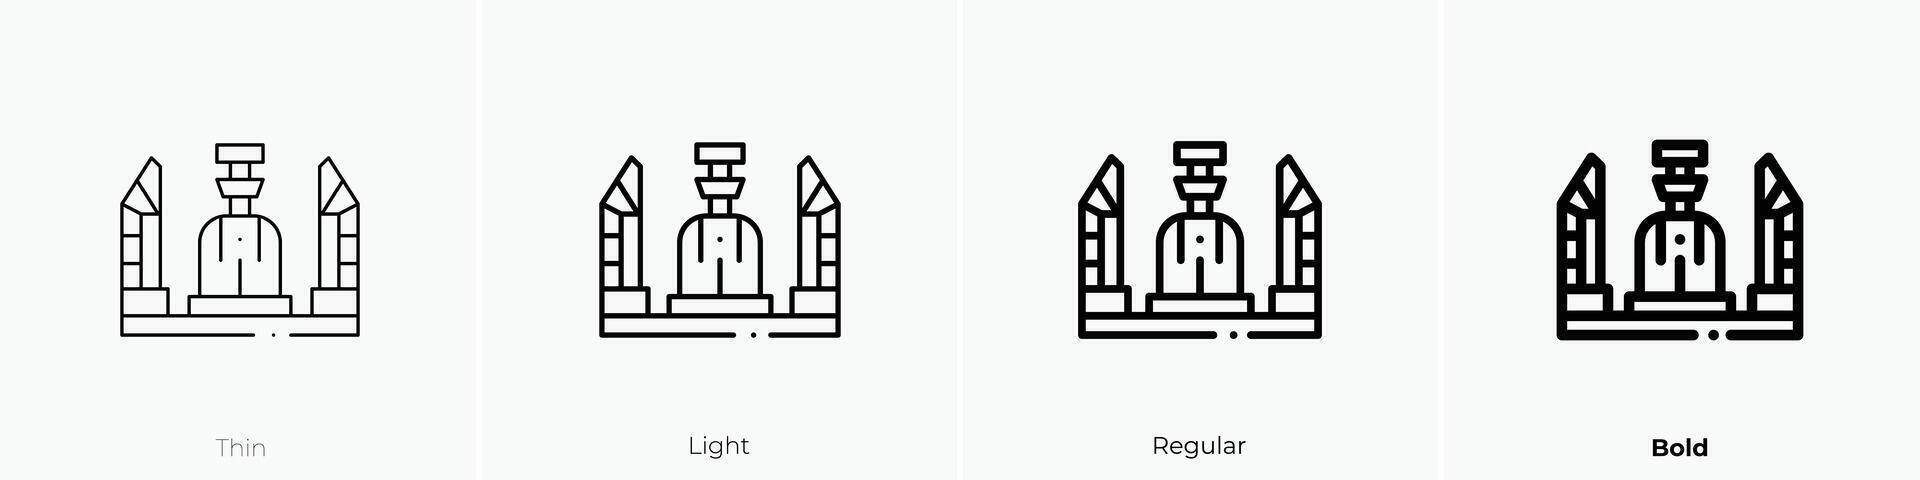 monument icon. Thin, Light, Regular And Bold style design isolated on white background vector